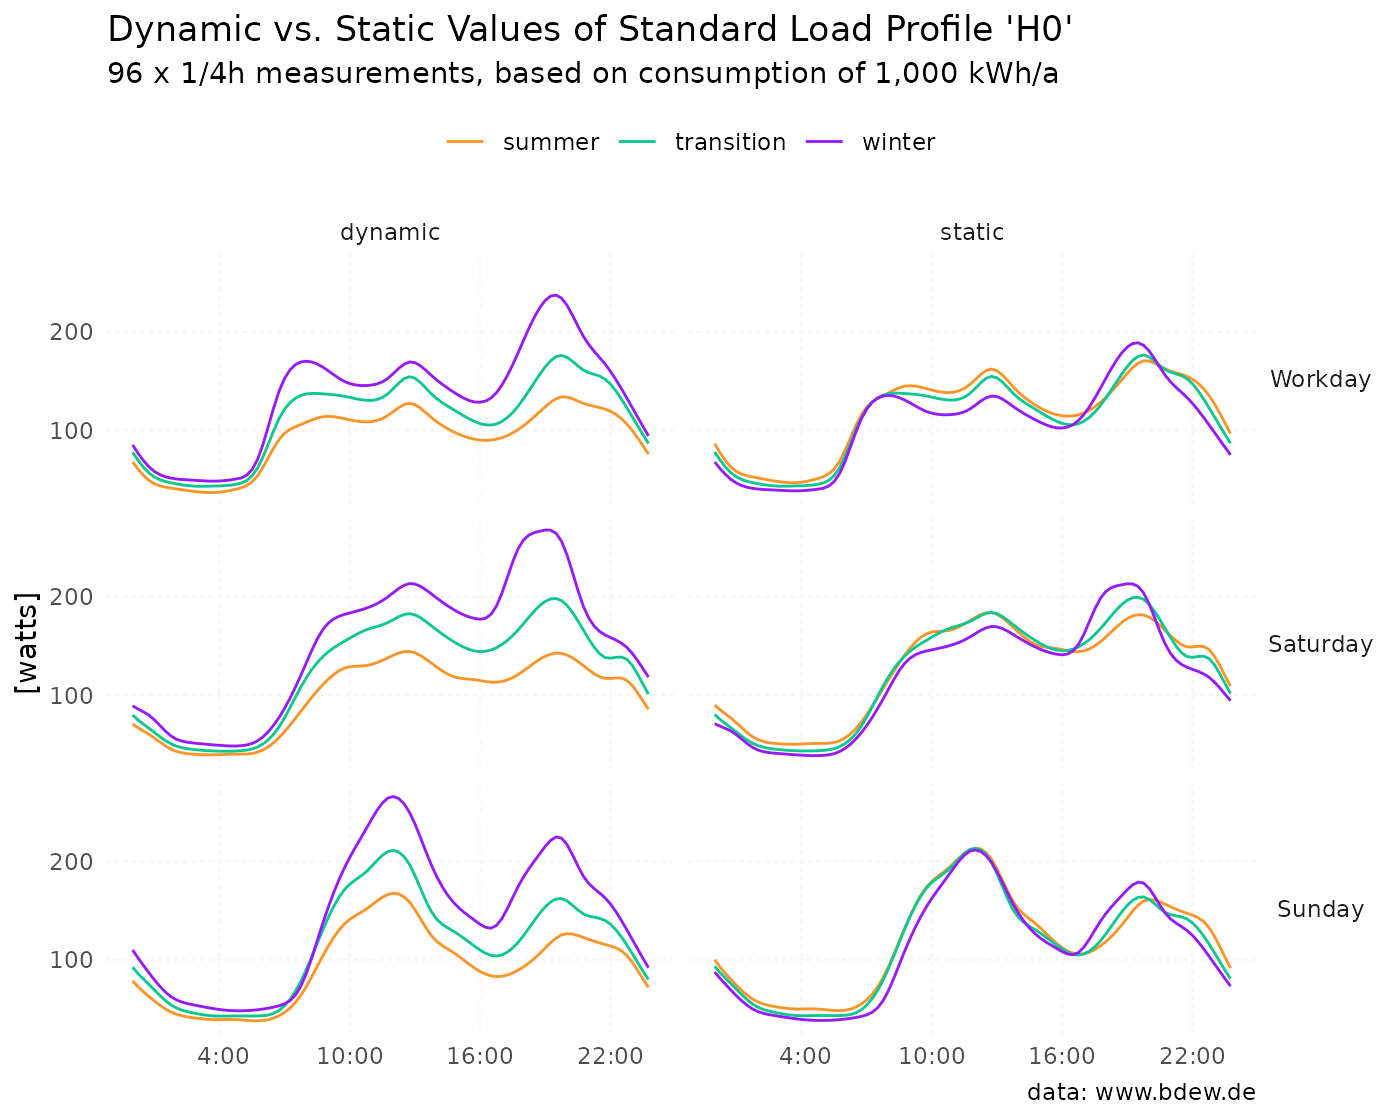 A plot of standard load profile 'H0' (households) that shows a comparision between the static values, and their dynamic counterparts.